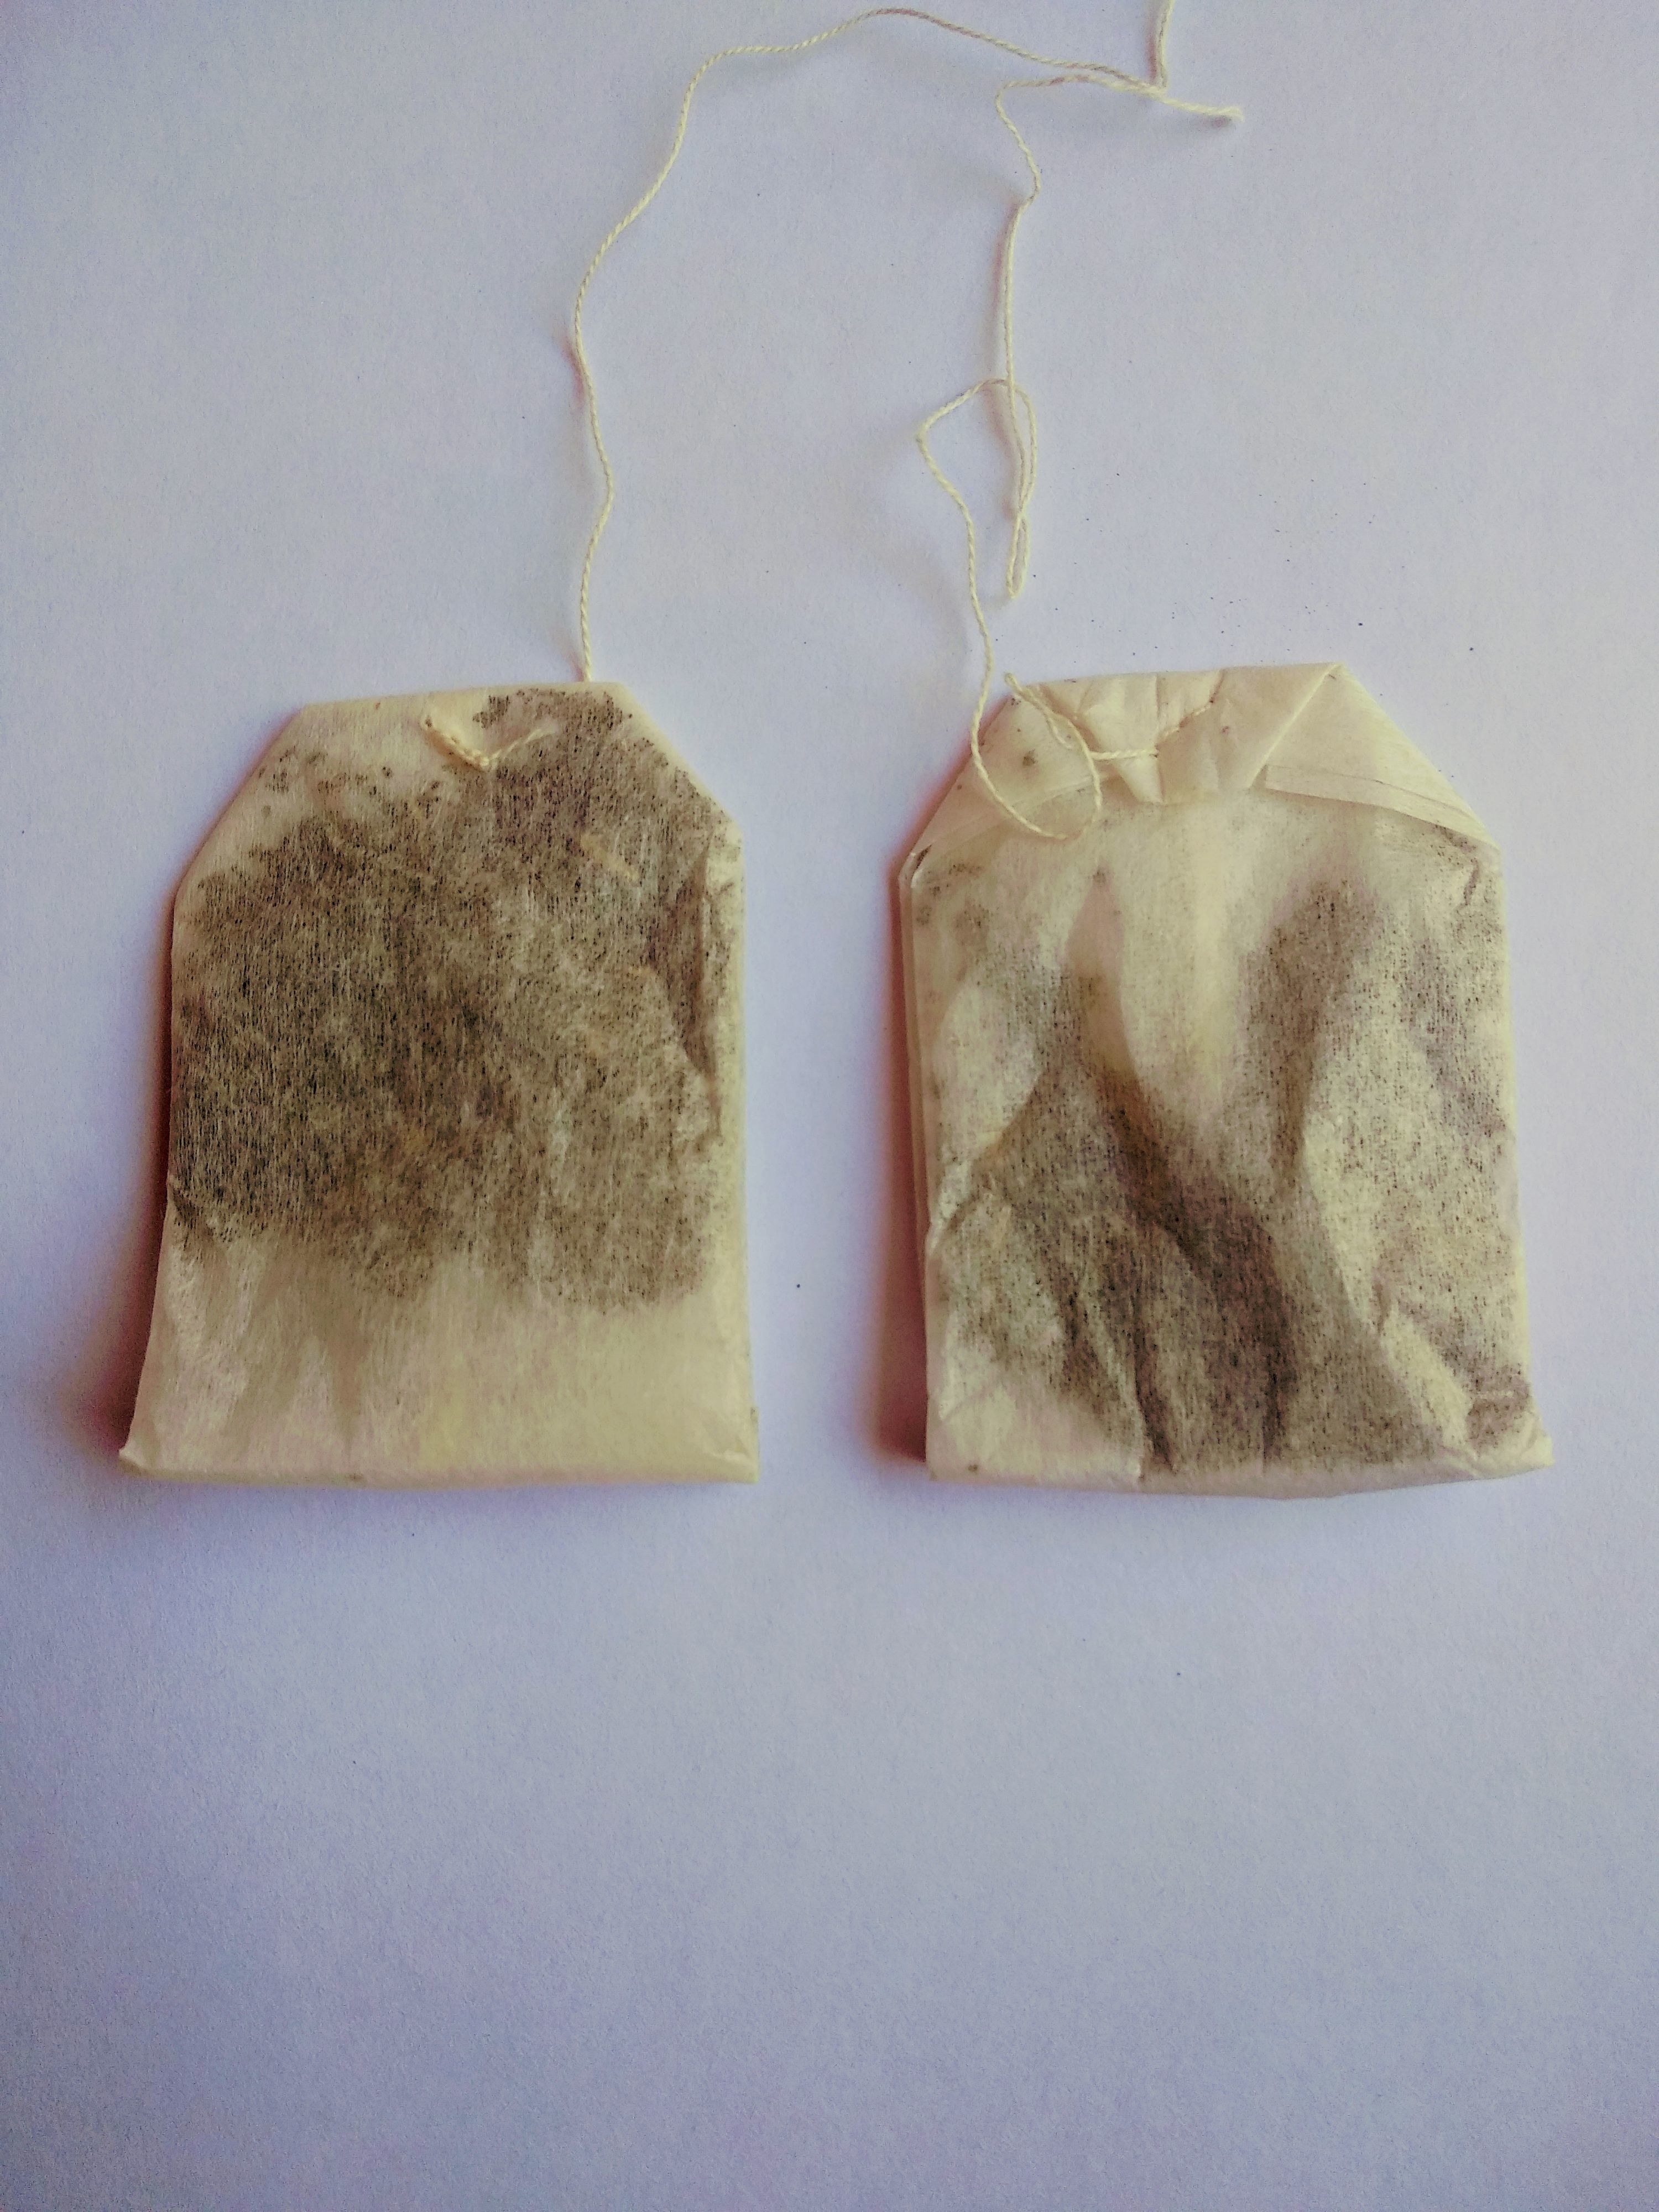 Two used teabags